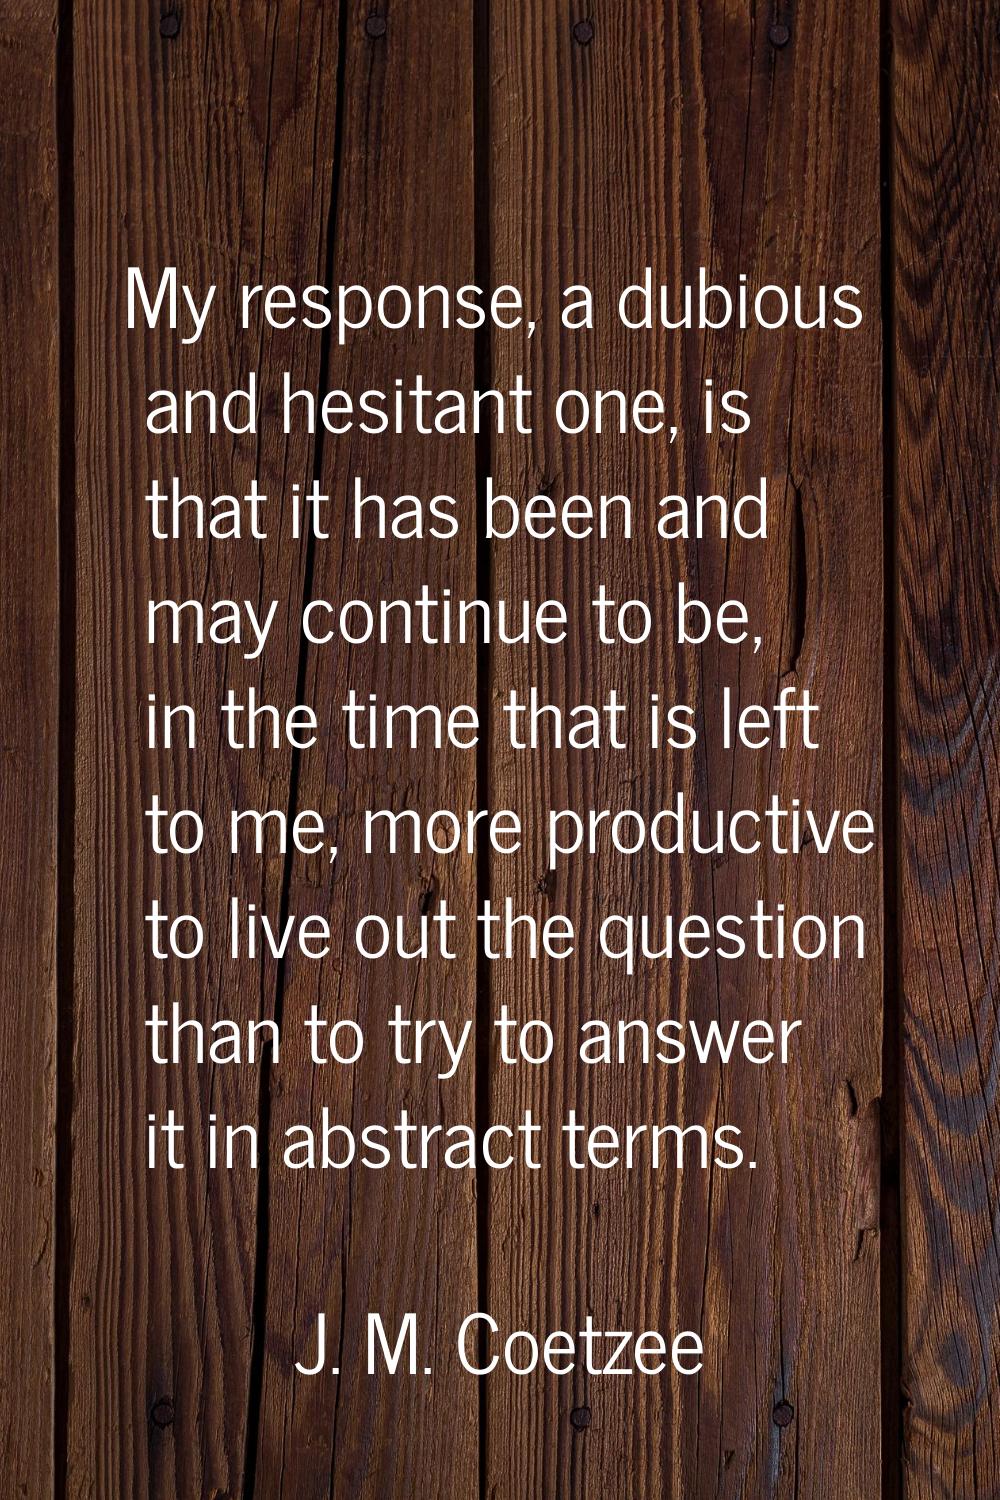 My response, a dubious and hesitant one, is that it has been and may continue to be, in the time th